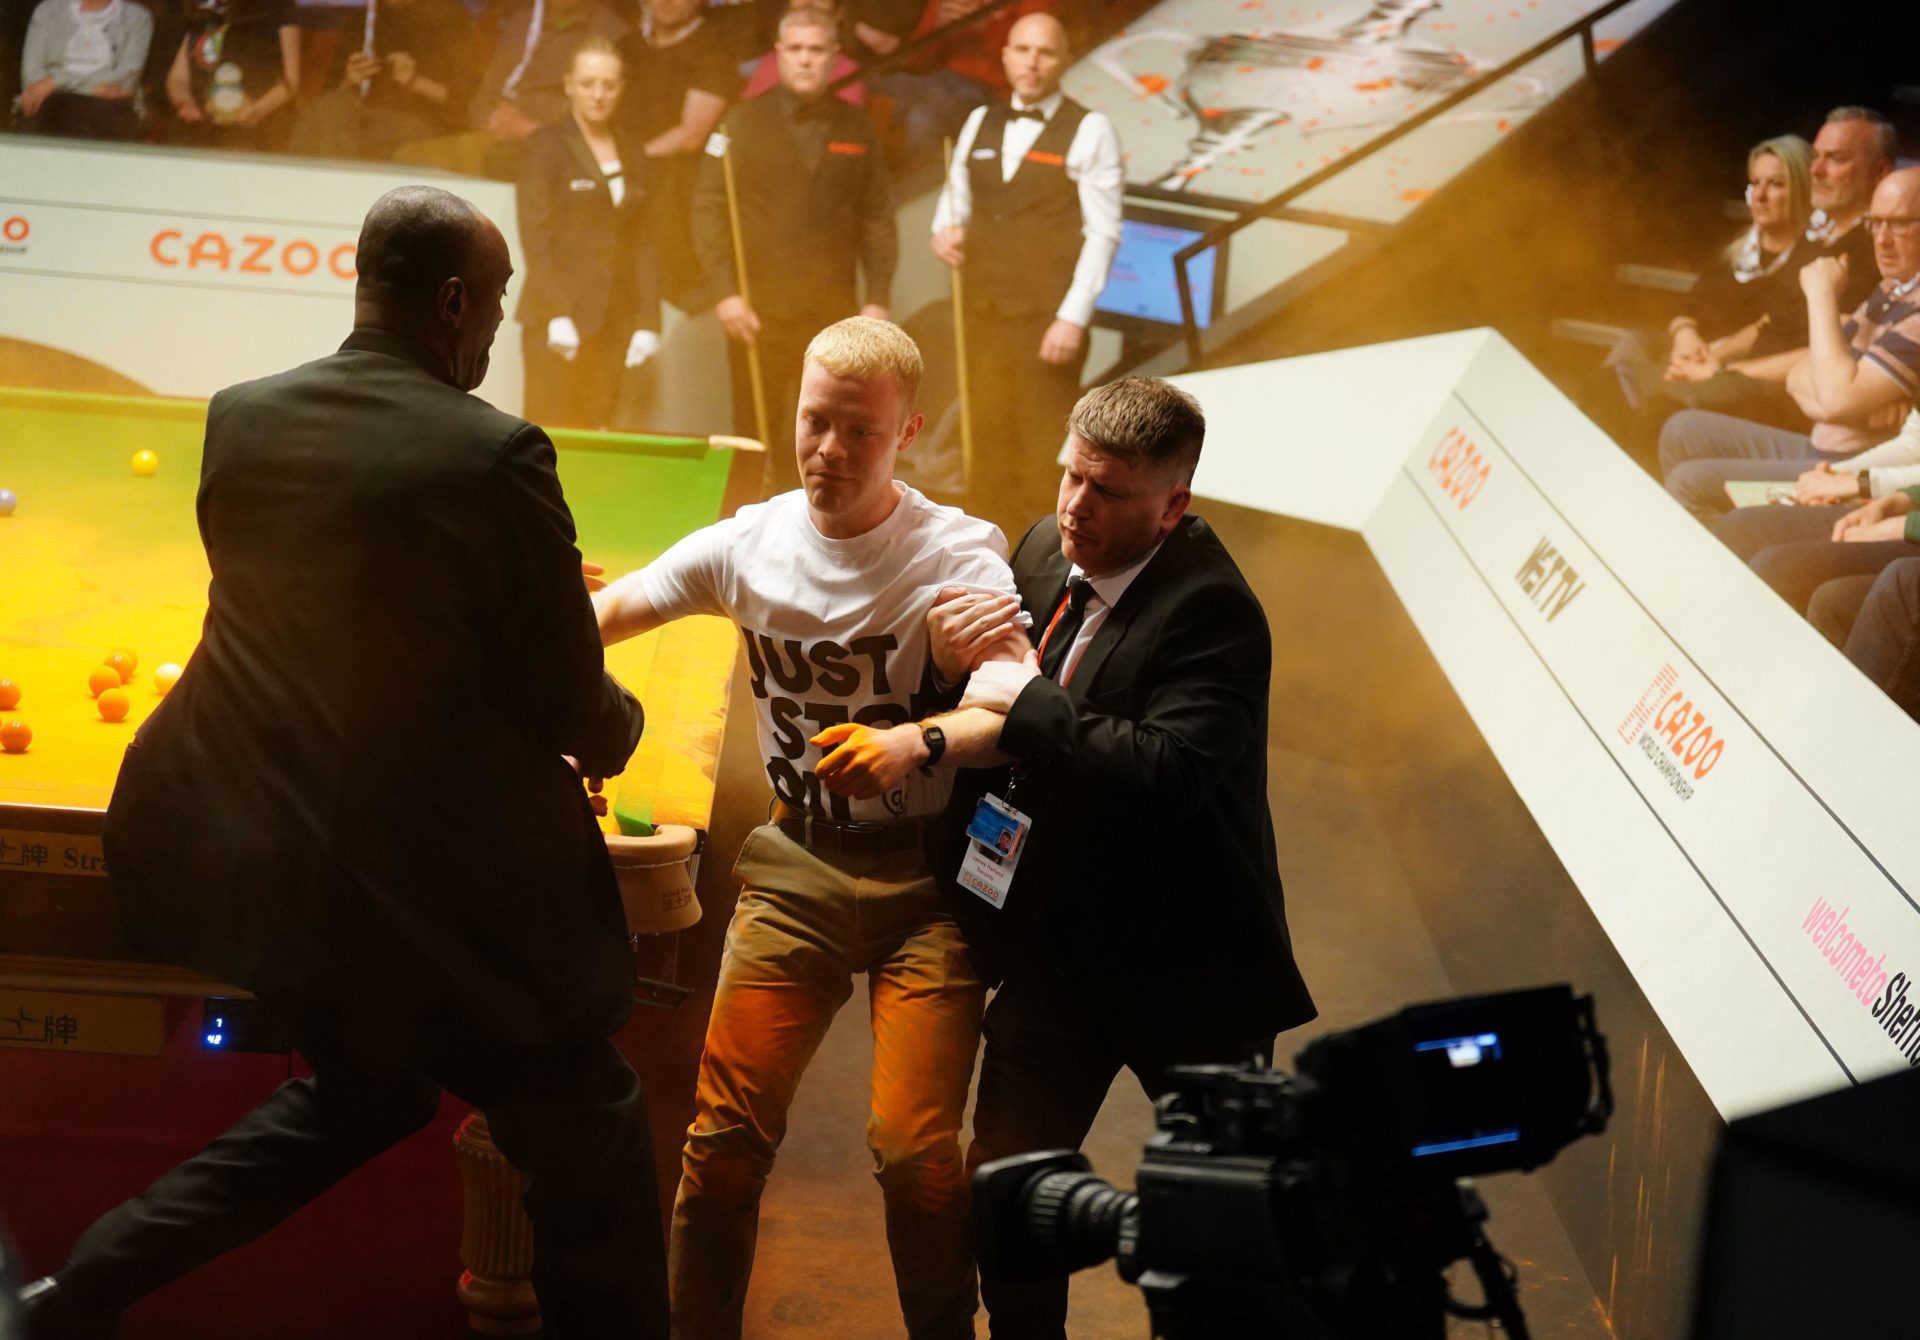 A Just Stop Oil protester is removed after throwing orange powder on a snooker table during the World Snooker Championship in Sheffield